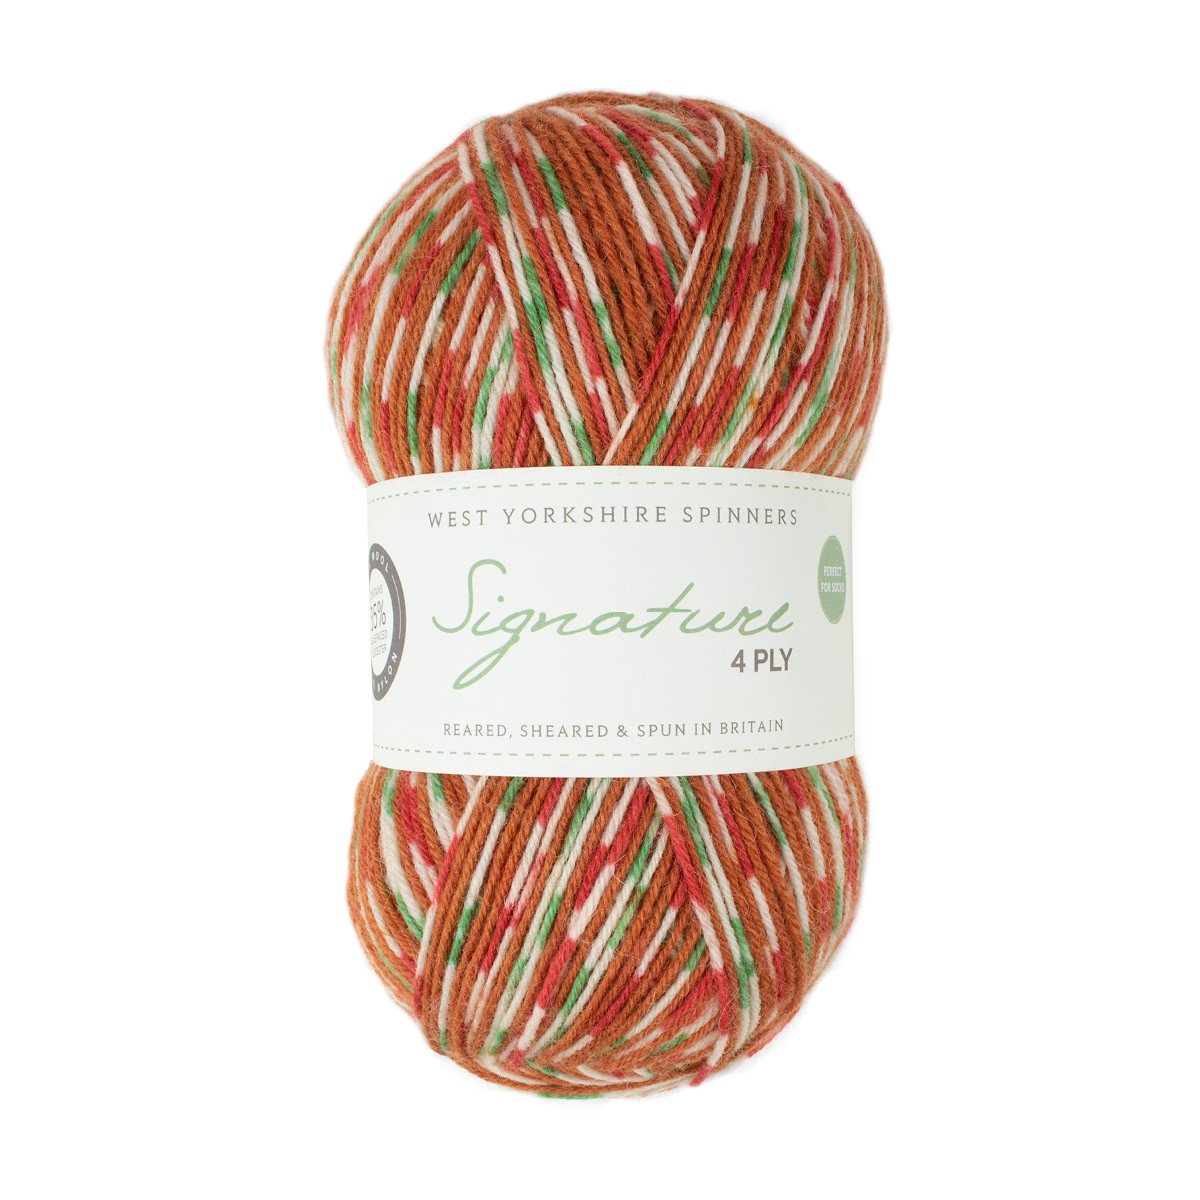 Signature 4ply - 1109 Gingerbread